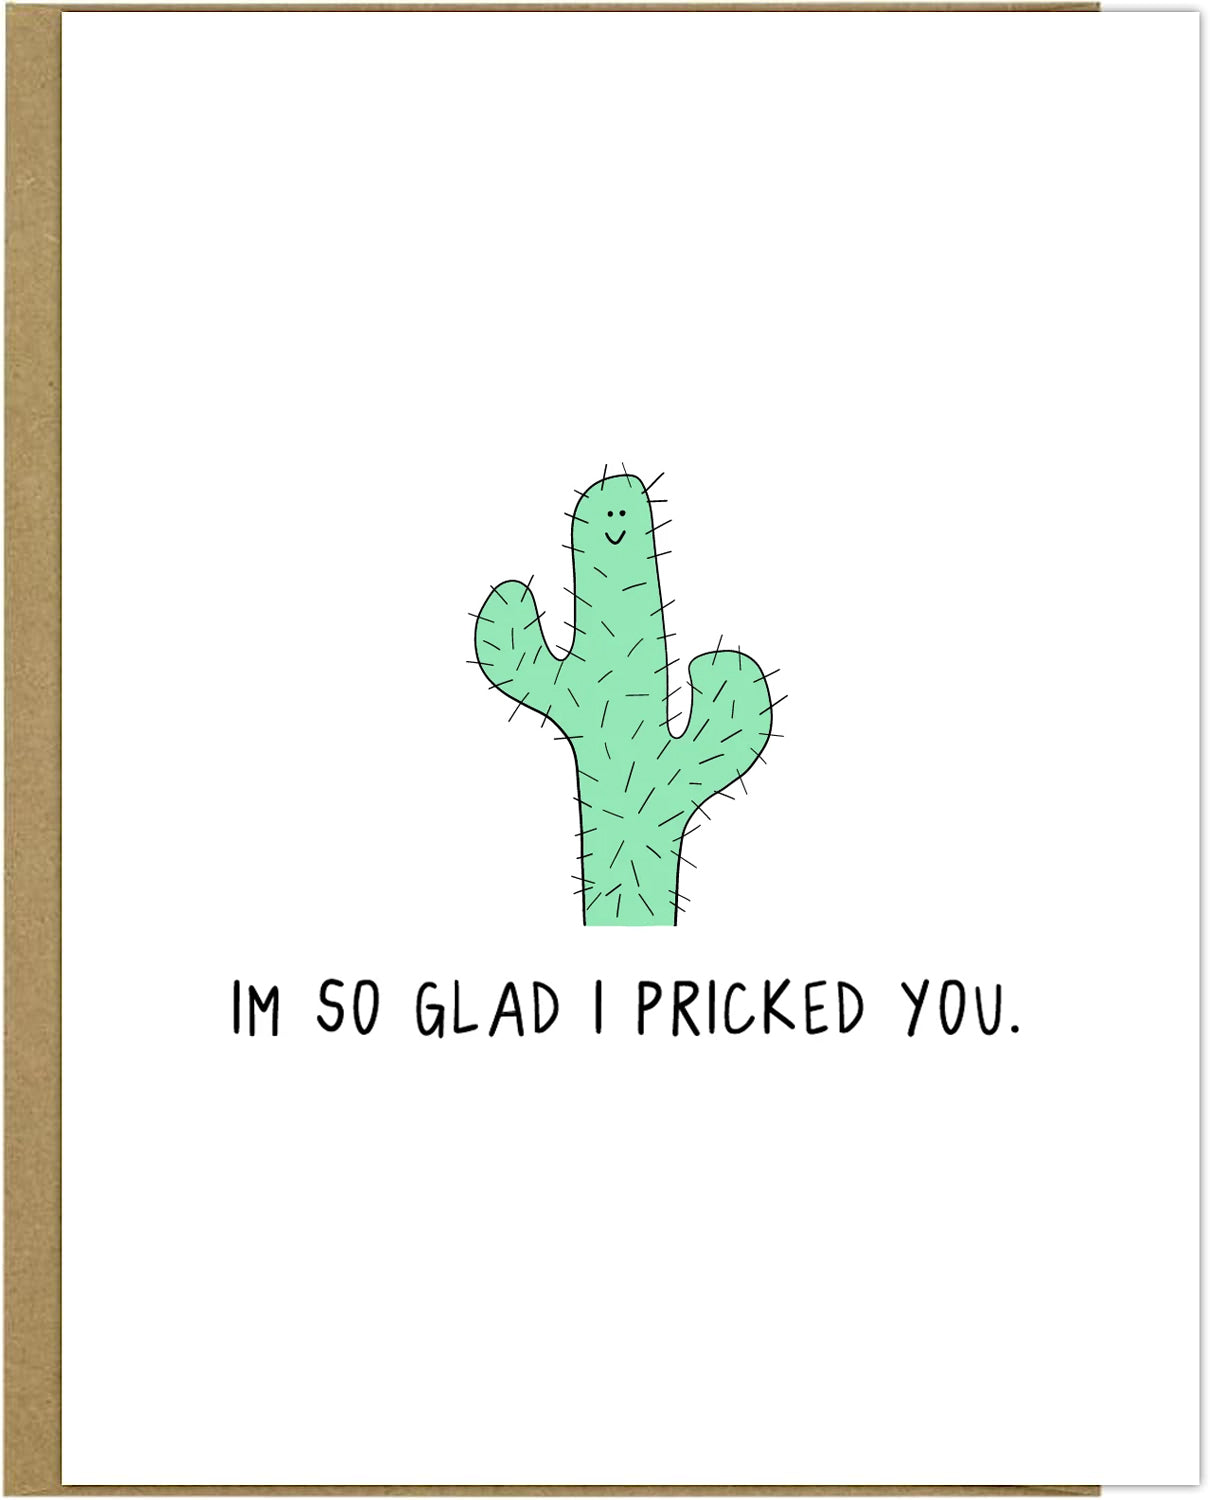 An embossed I Prick You Card with a cactus on the front and blank inside, made by rockdoodles.